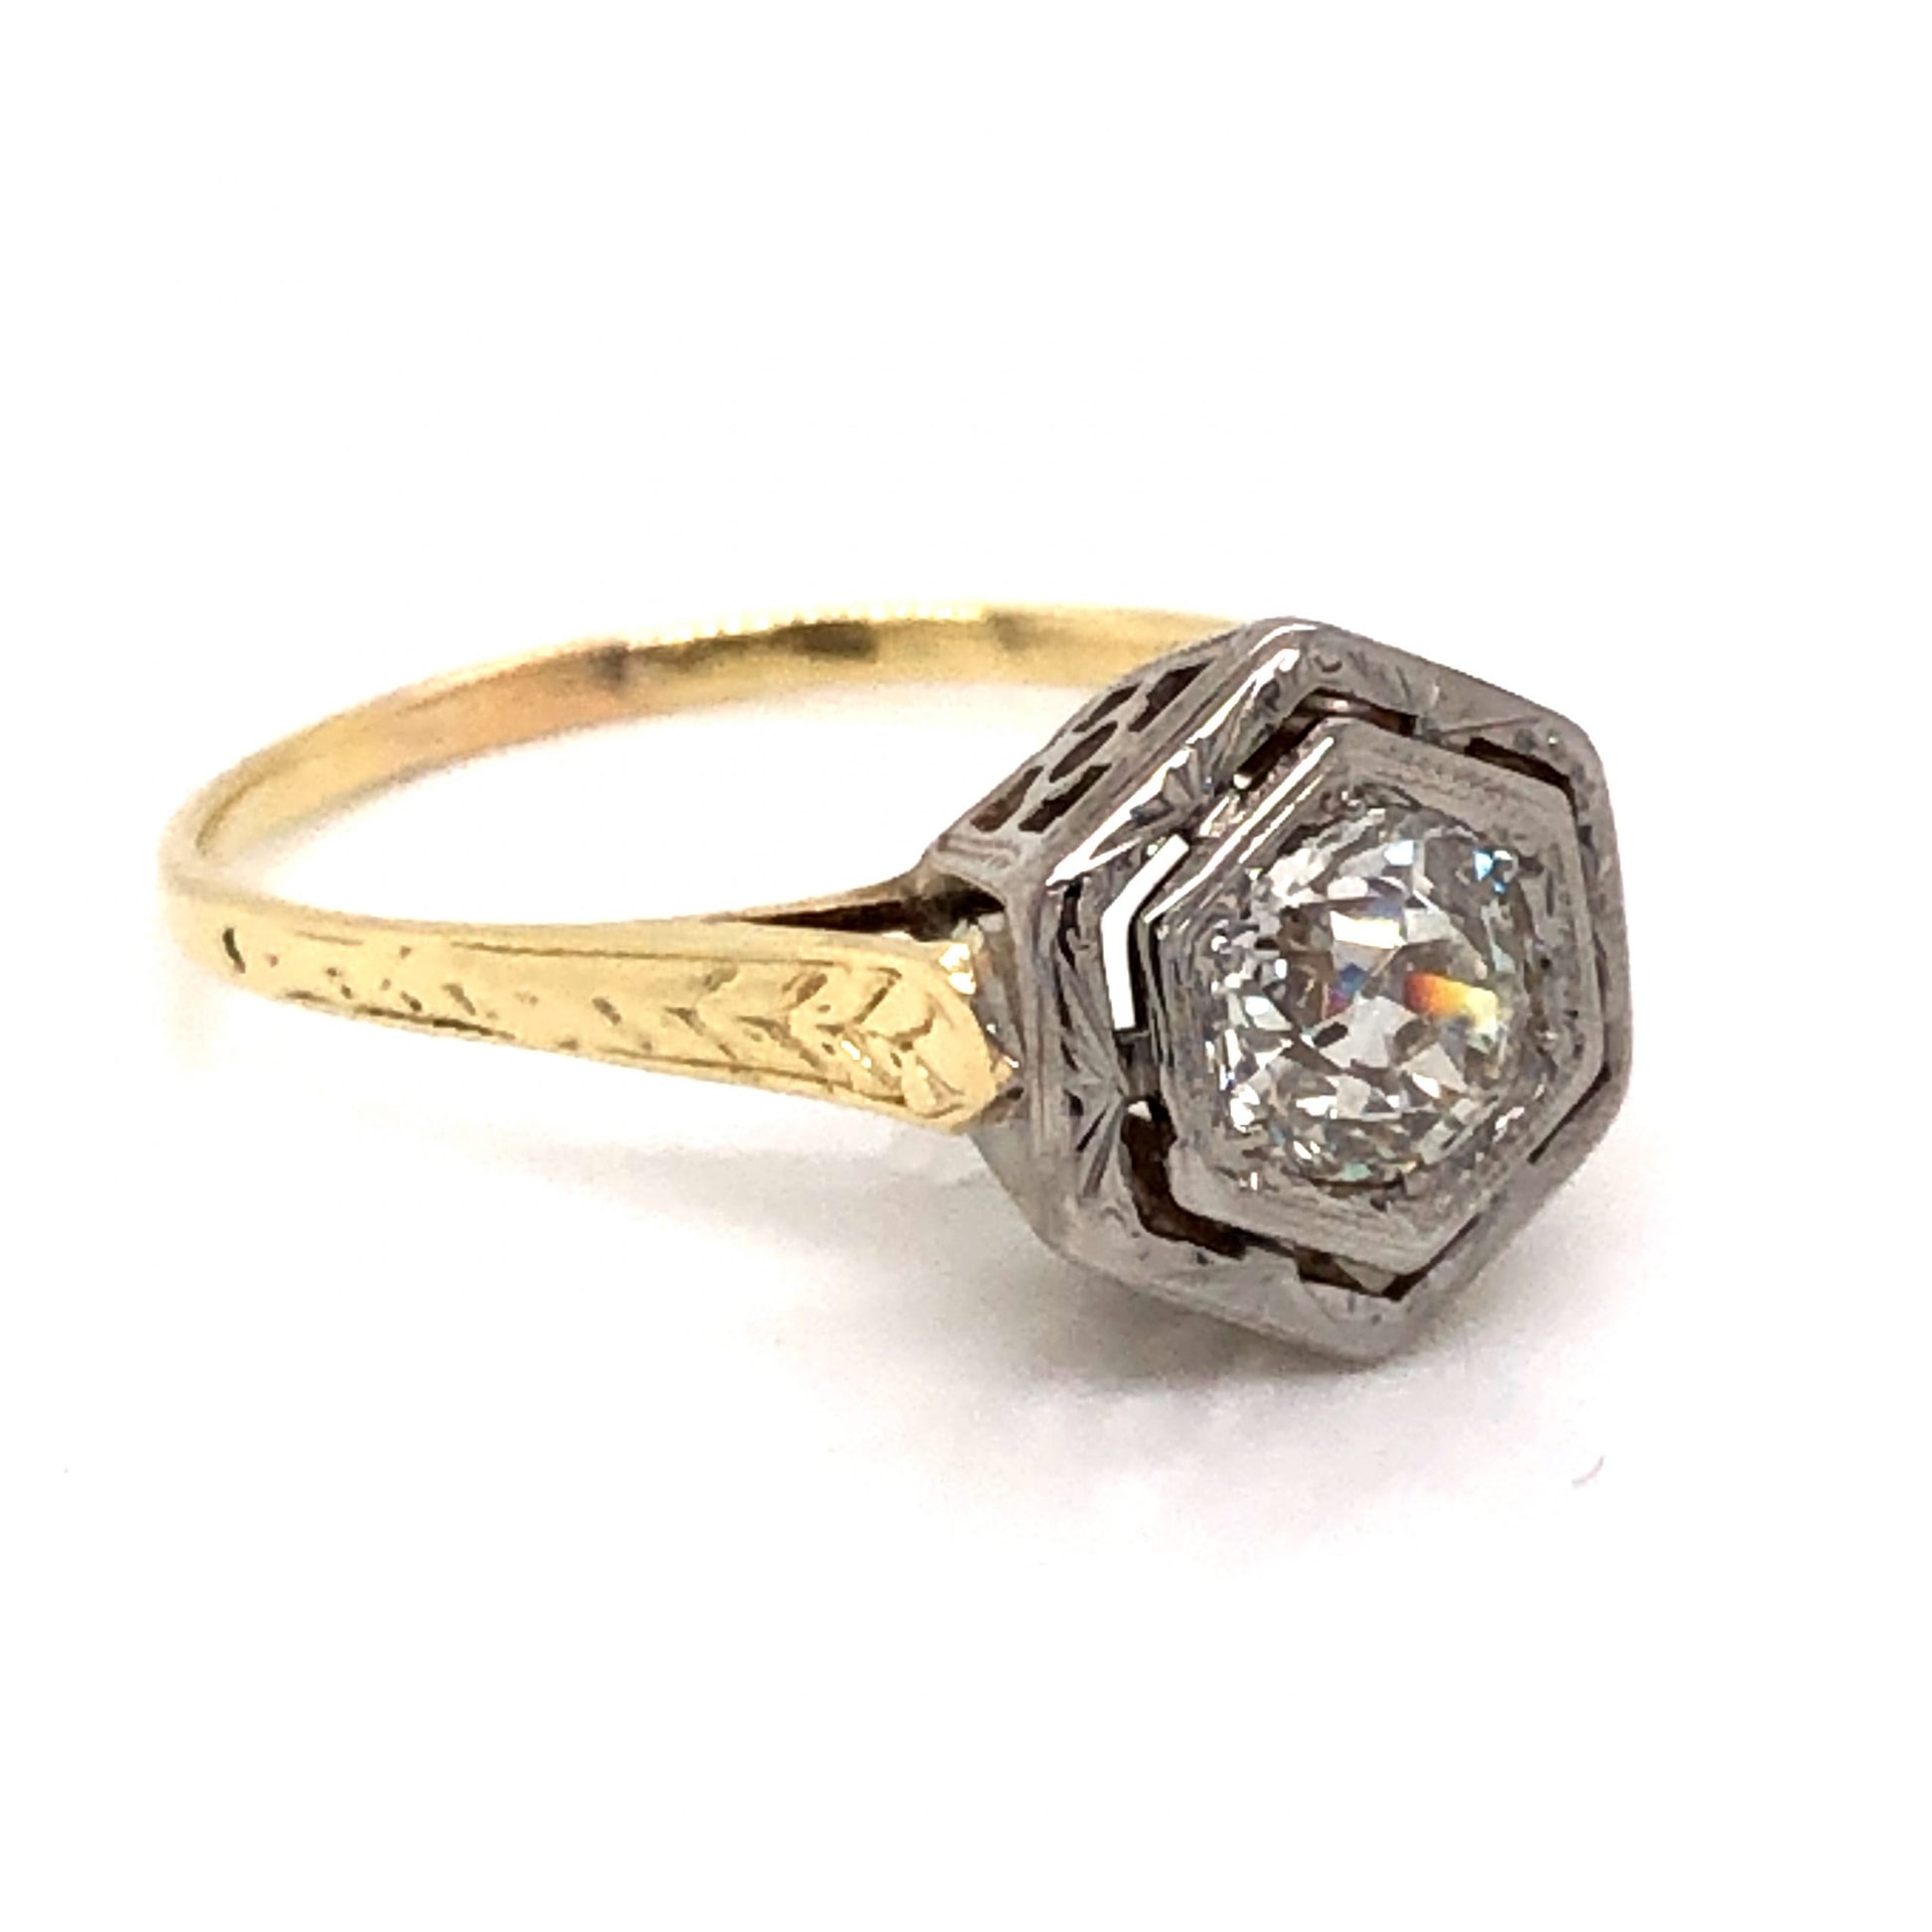 .72 Art Deco Two-Tone Diamond Engagement Ring in 14k